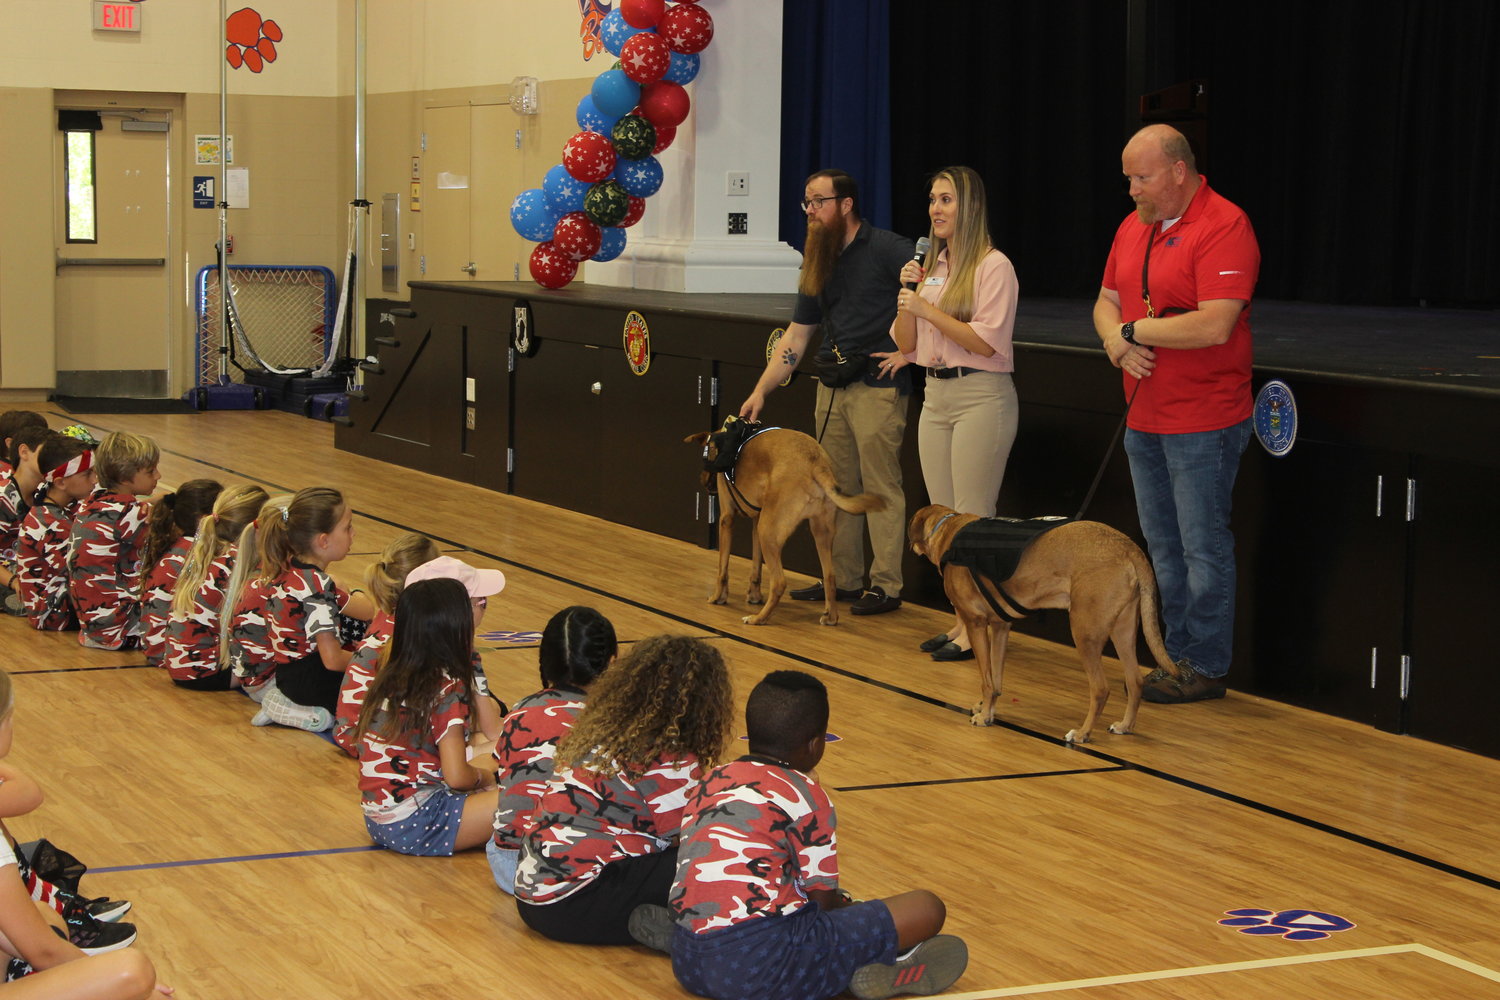 James Rutland with Dunkin, K-9s For Warriors senior development specialist Carly Braun and Greg Wells with Utah, from left, speak to students at The Bolles Lower School Ponte Vedra Beach Campus during field day on May 6.